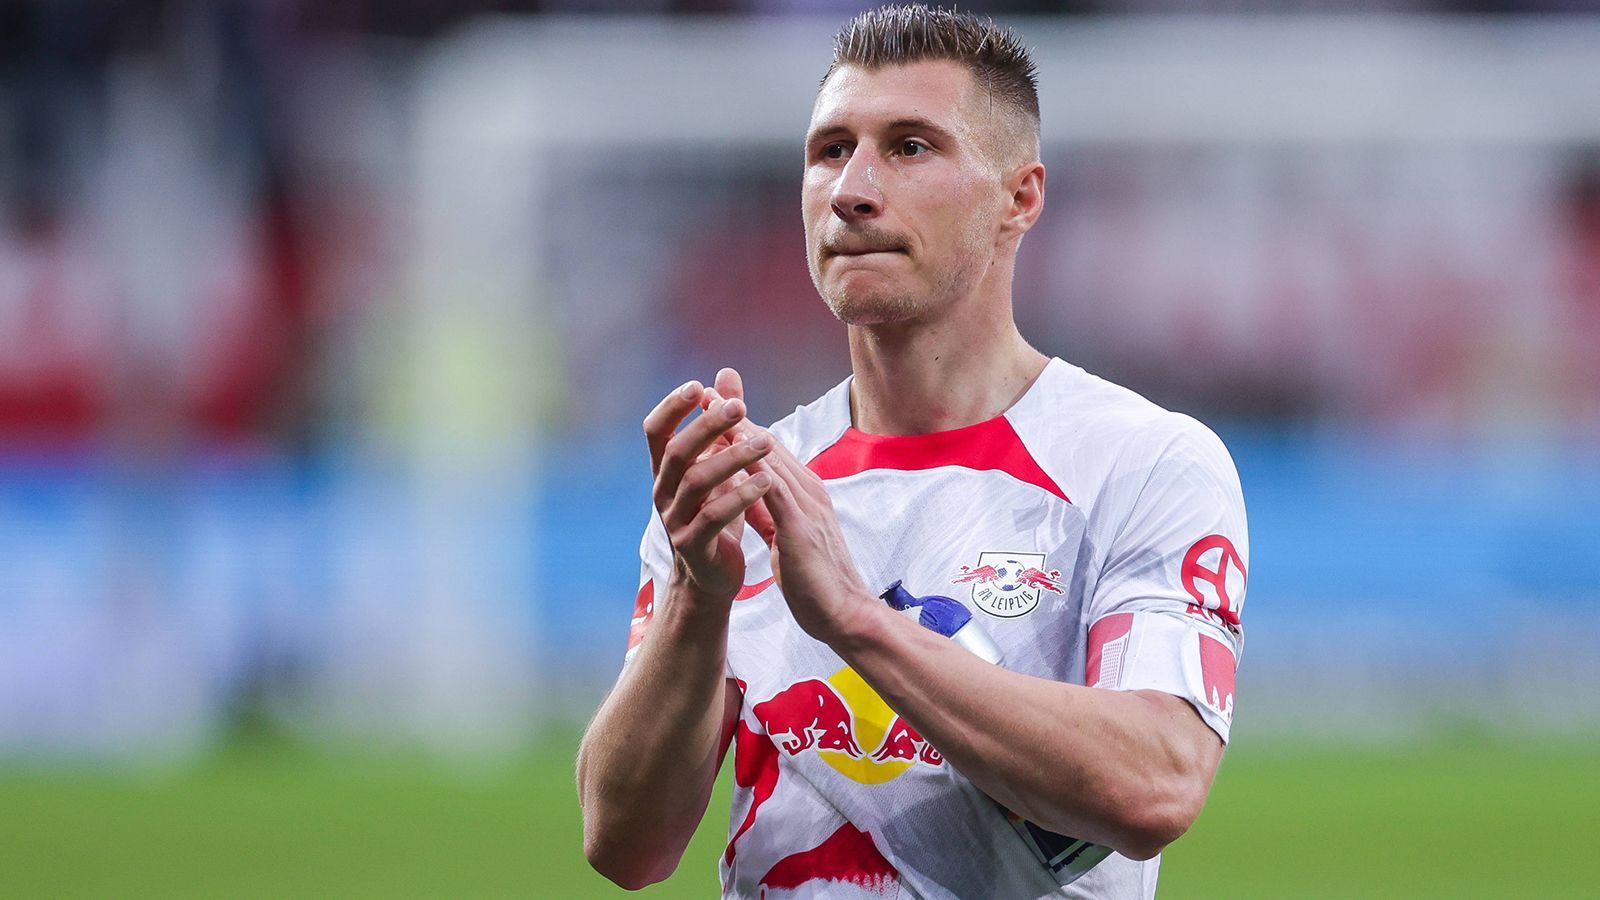 
                <strong>Abwehr: Willi Orban </strong><br>
                &#x2022; Team: RB Leipzig<br>&#x2022; Nation: Ungarn<br>
              